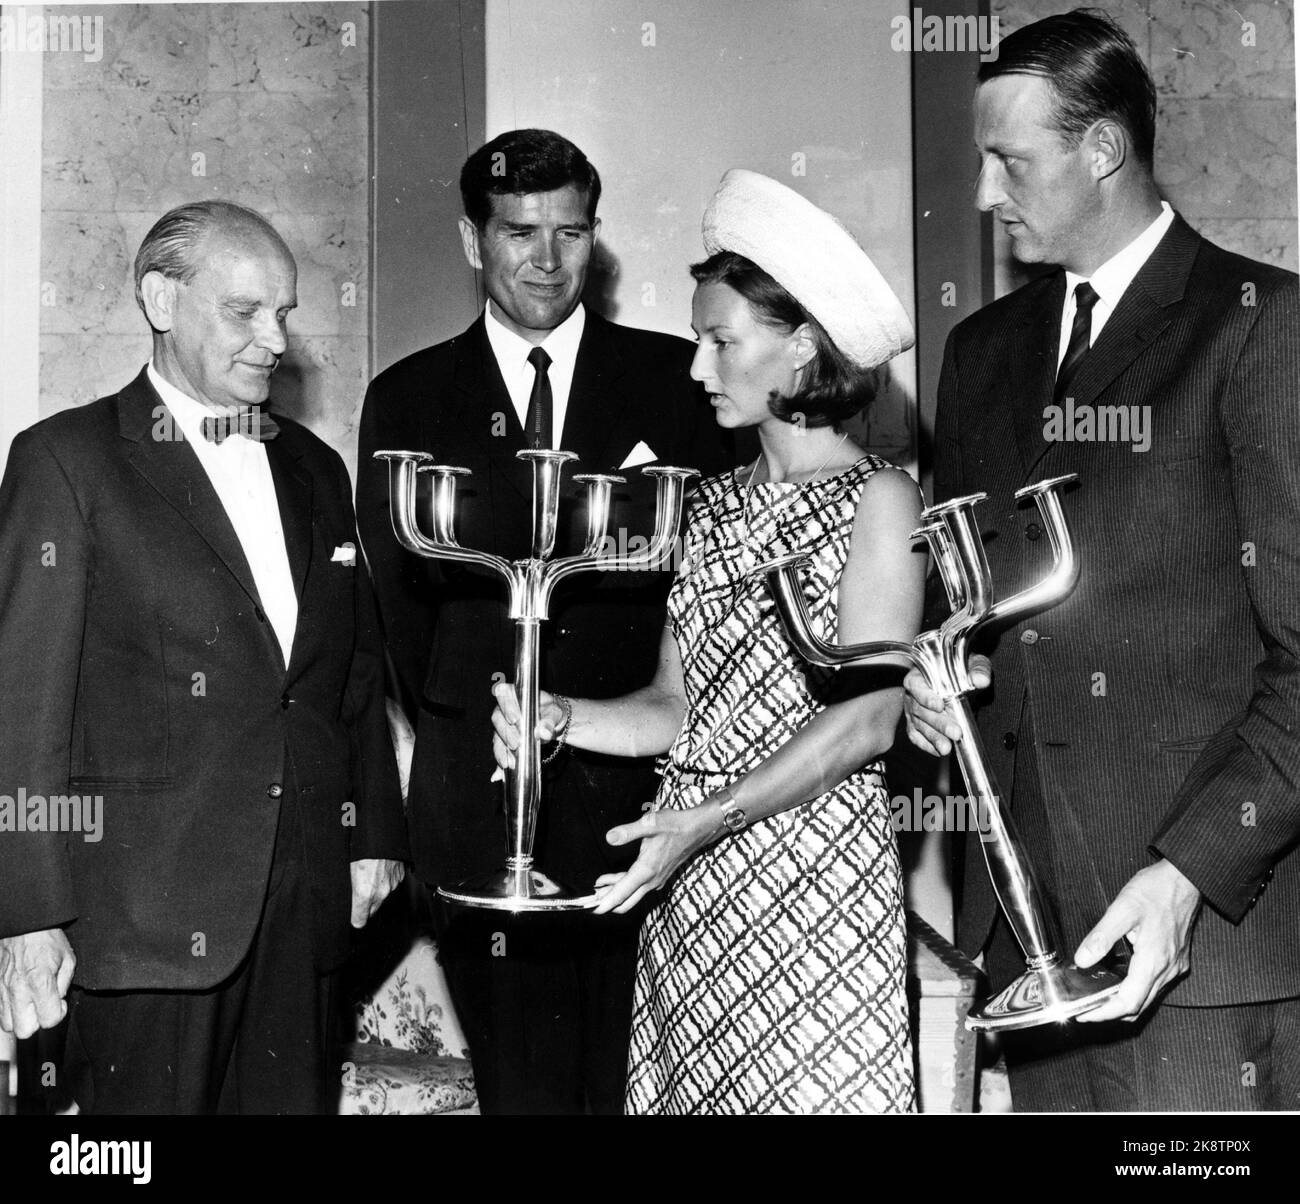 Oslo 1968-08-29: Royal Norwegian wedding. Crown Prince Harald marries Sonja Haraldsen. The couple received a lot of gifts. Here they receive the gift from Asker municipality. Candlesticks in tin / silver? Sonja in hat and short dress, Harald in suit. NTB - Stock Photo. Stock Photo